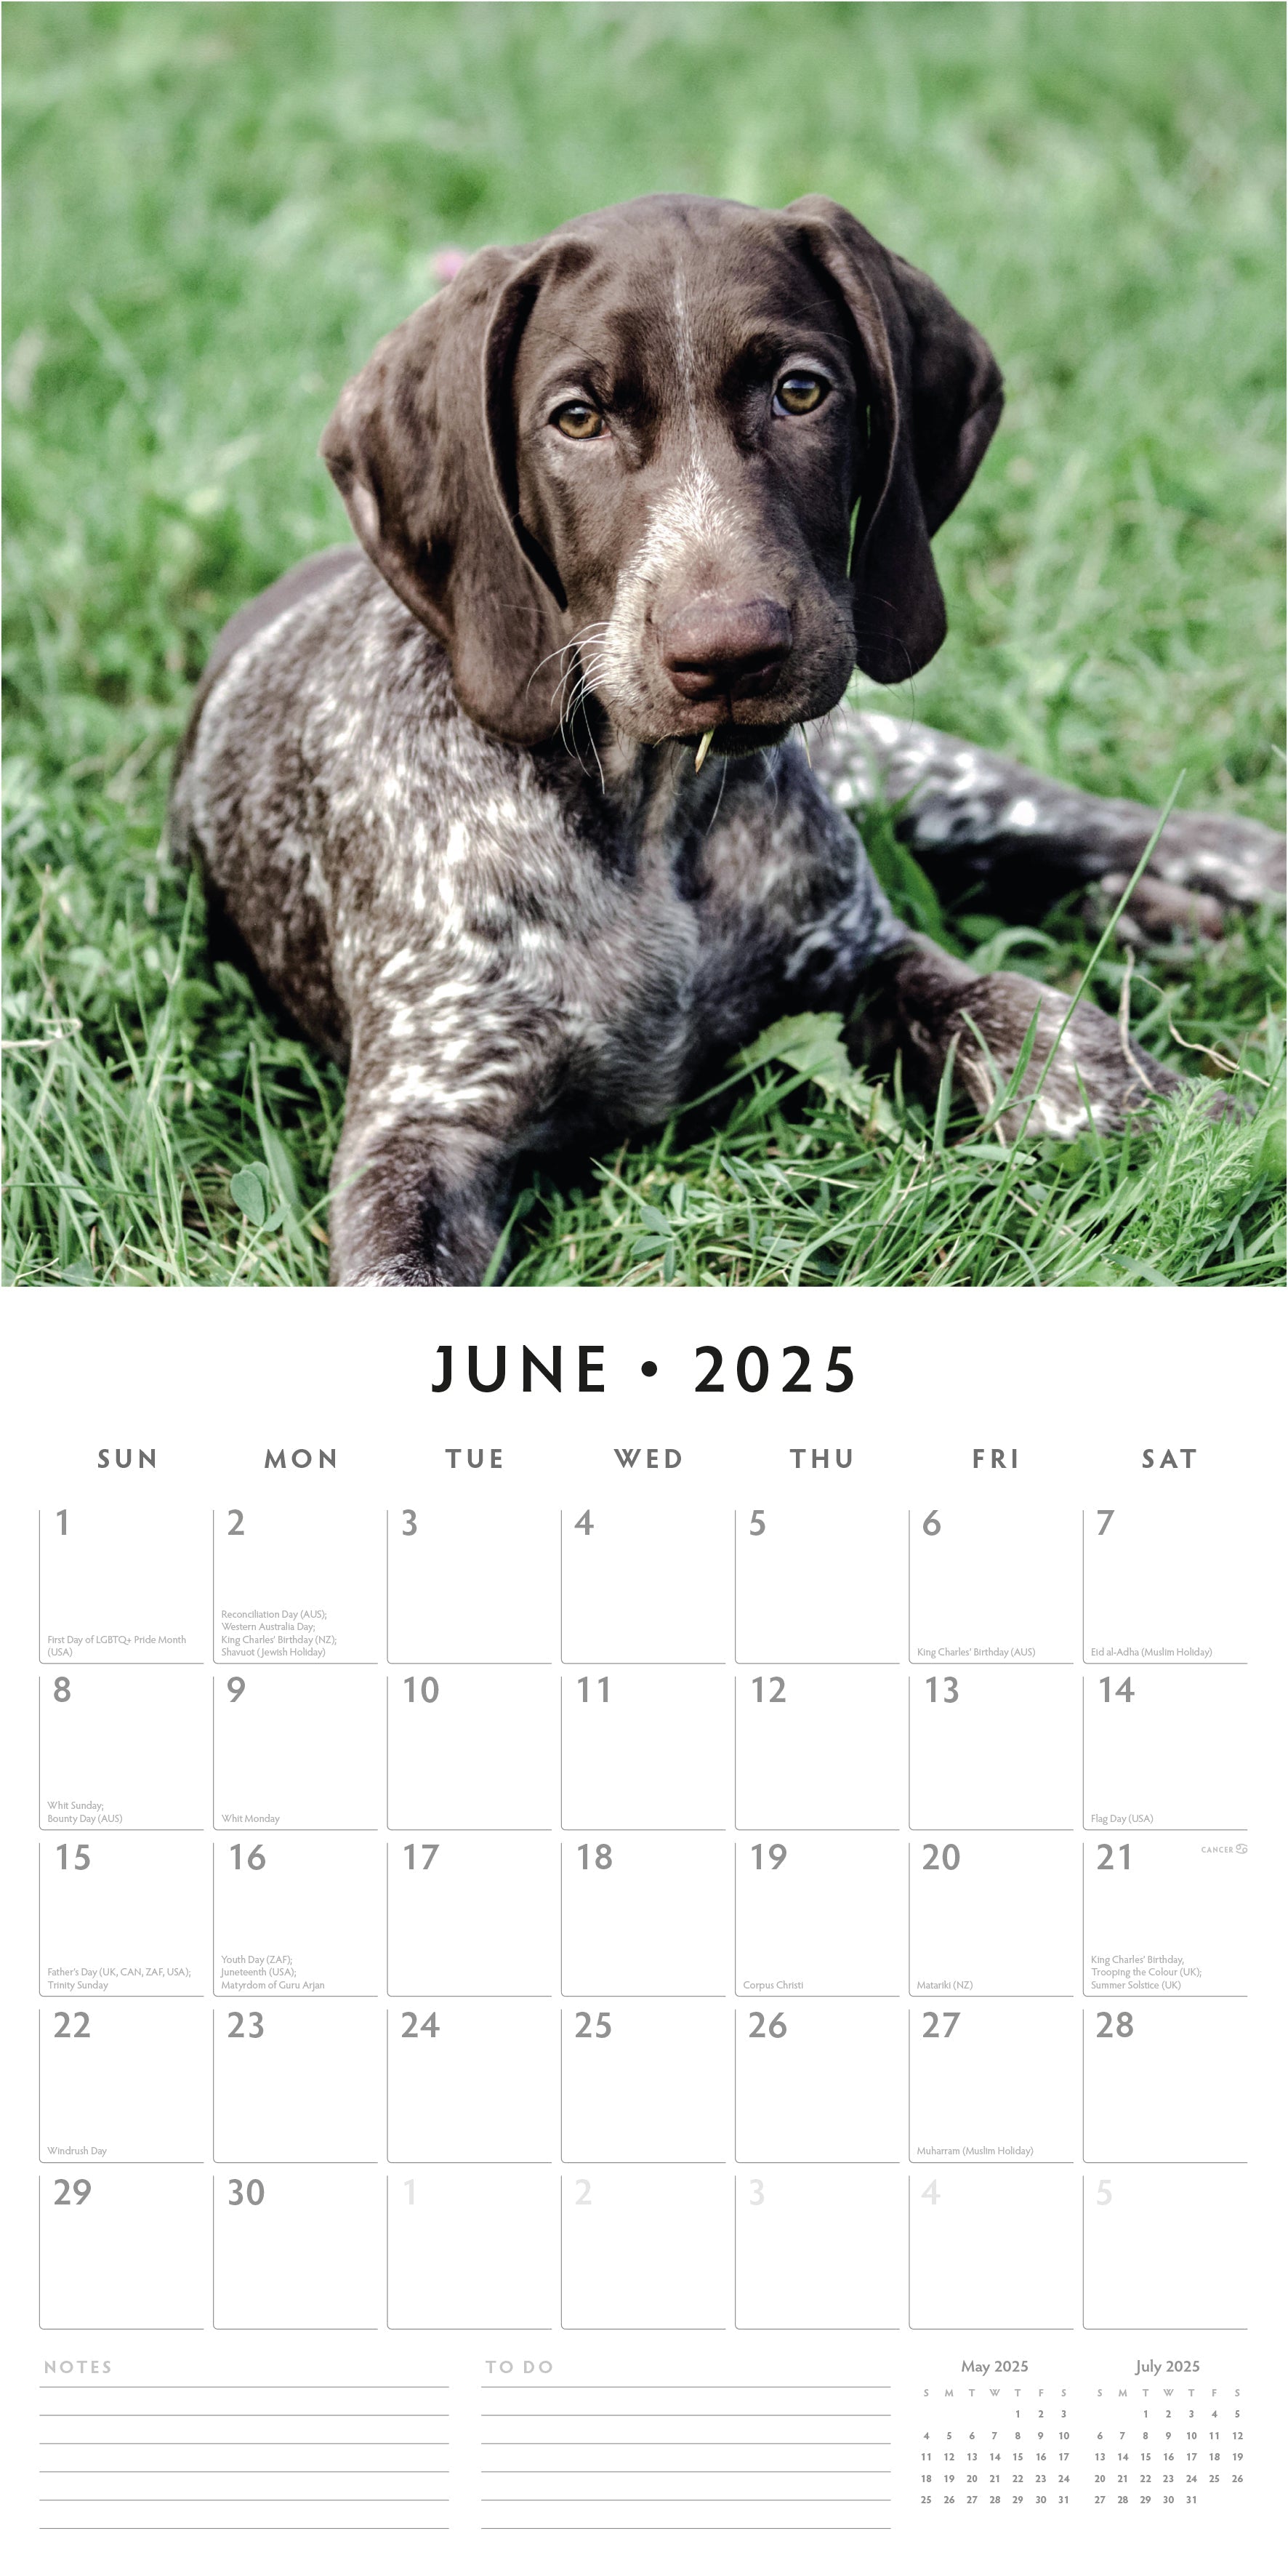 2025 Pointers - Square Wall Calendar